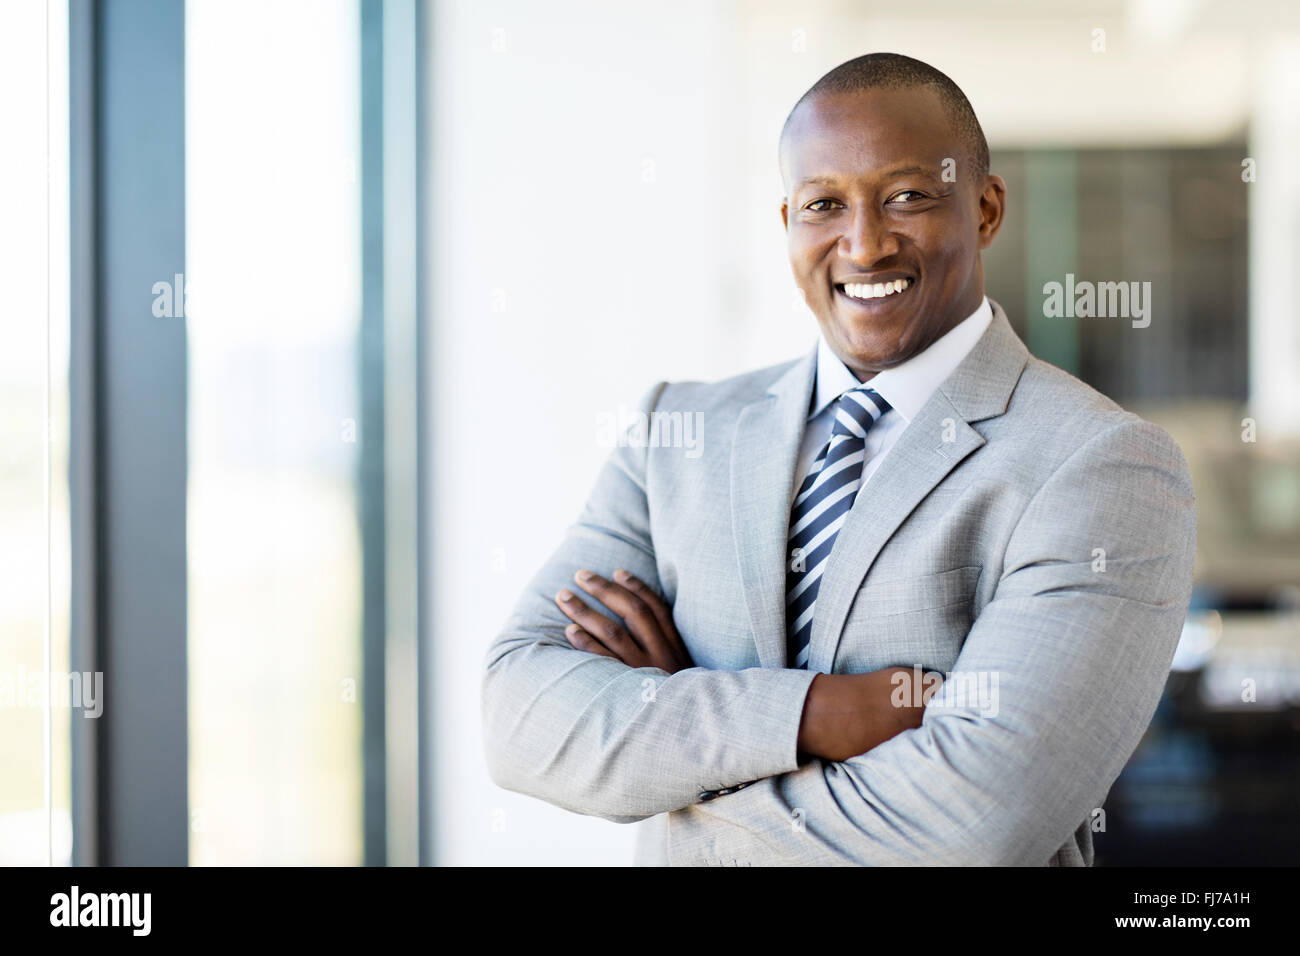 Cheerful African American office worker with arms folded Banque D'Images